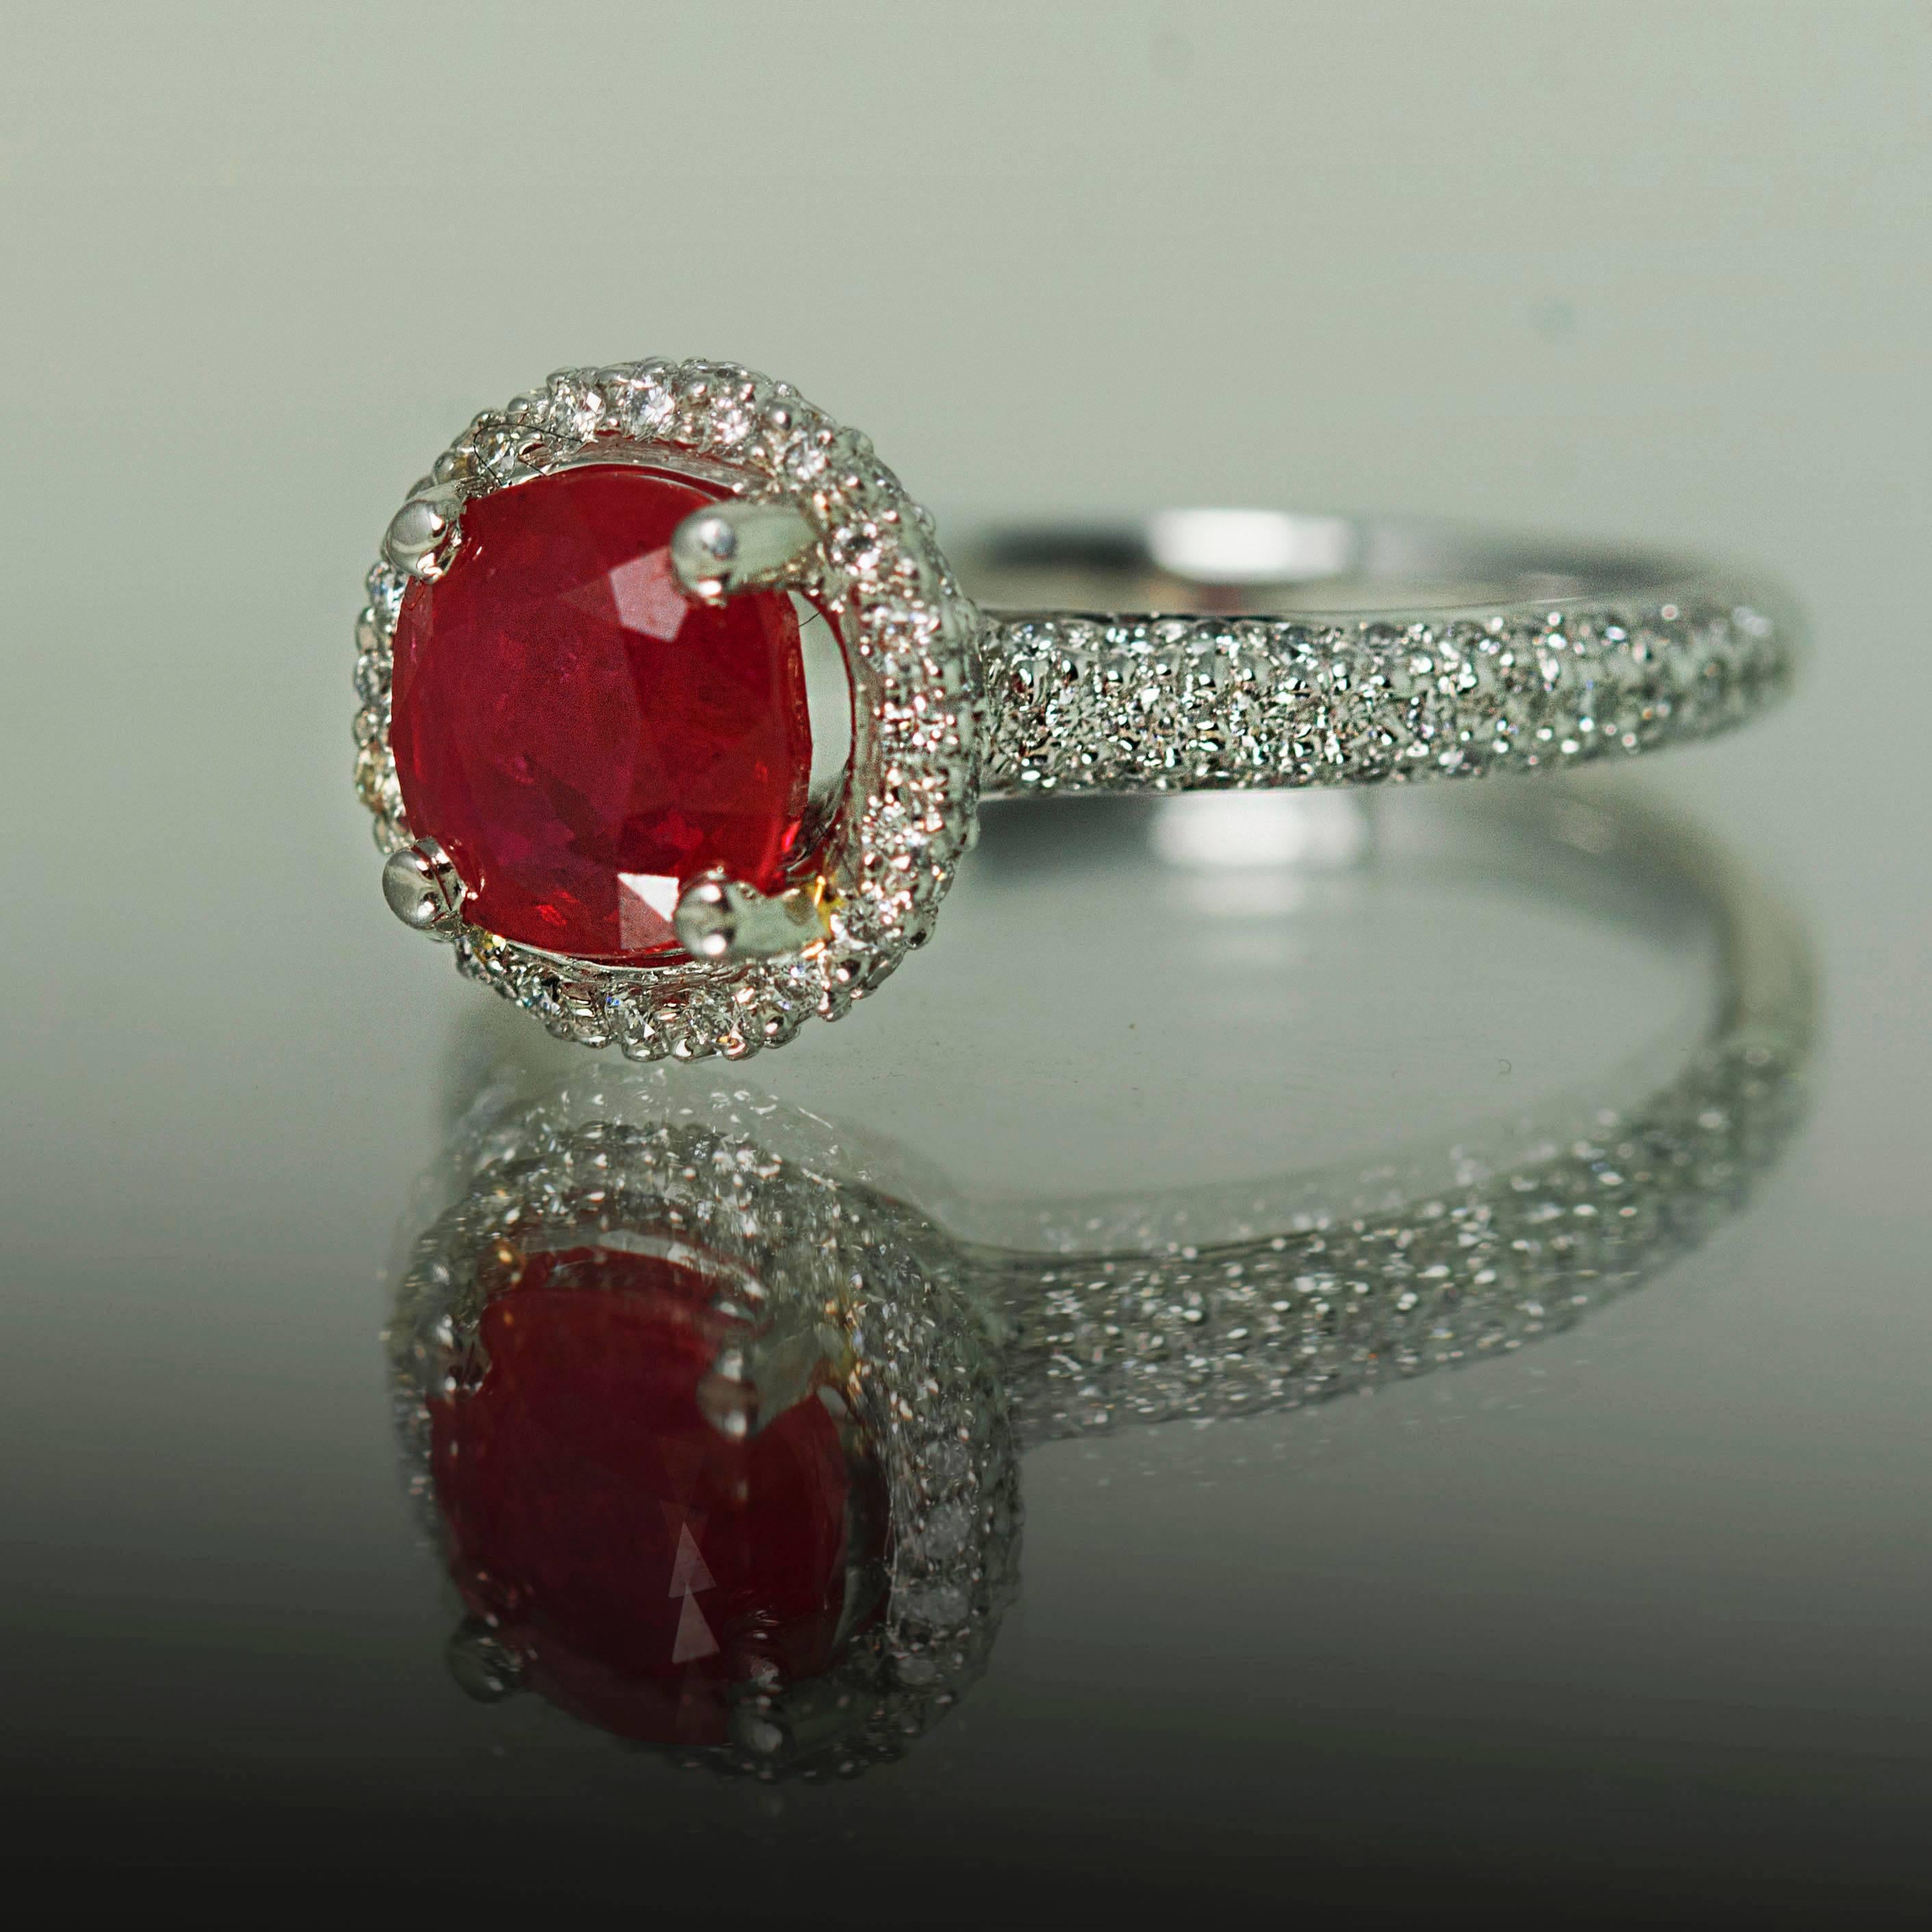 18K Ring with 1 Burma Ruby Weighing 1.81 Carats and 122 Diamonds Weighing 0.45 Carats. 